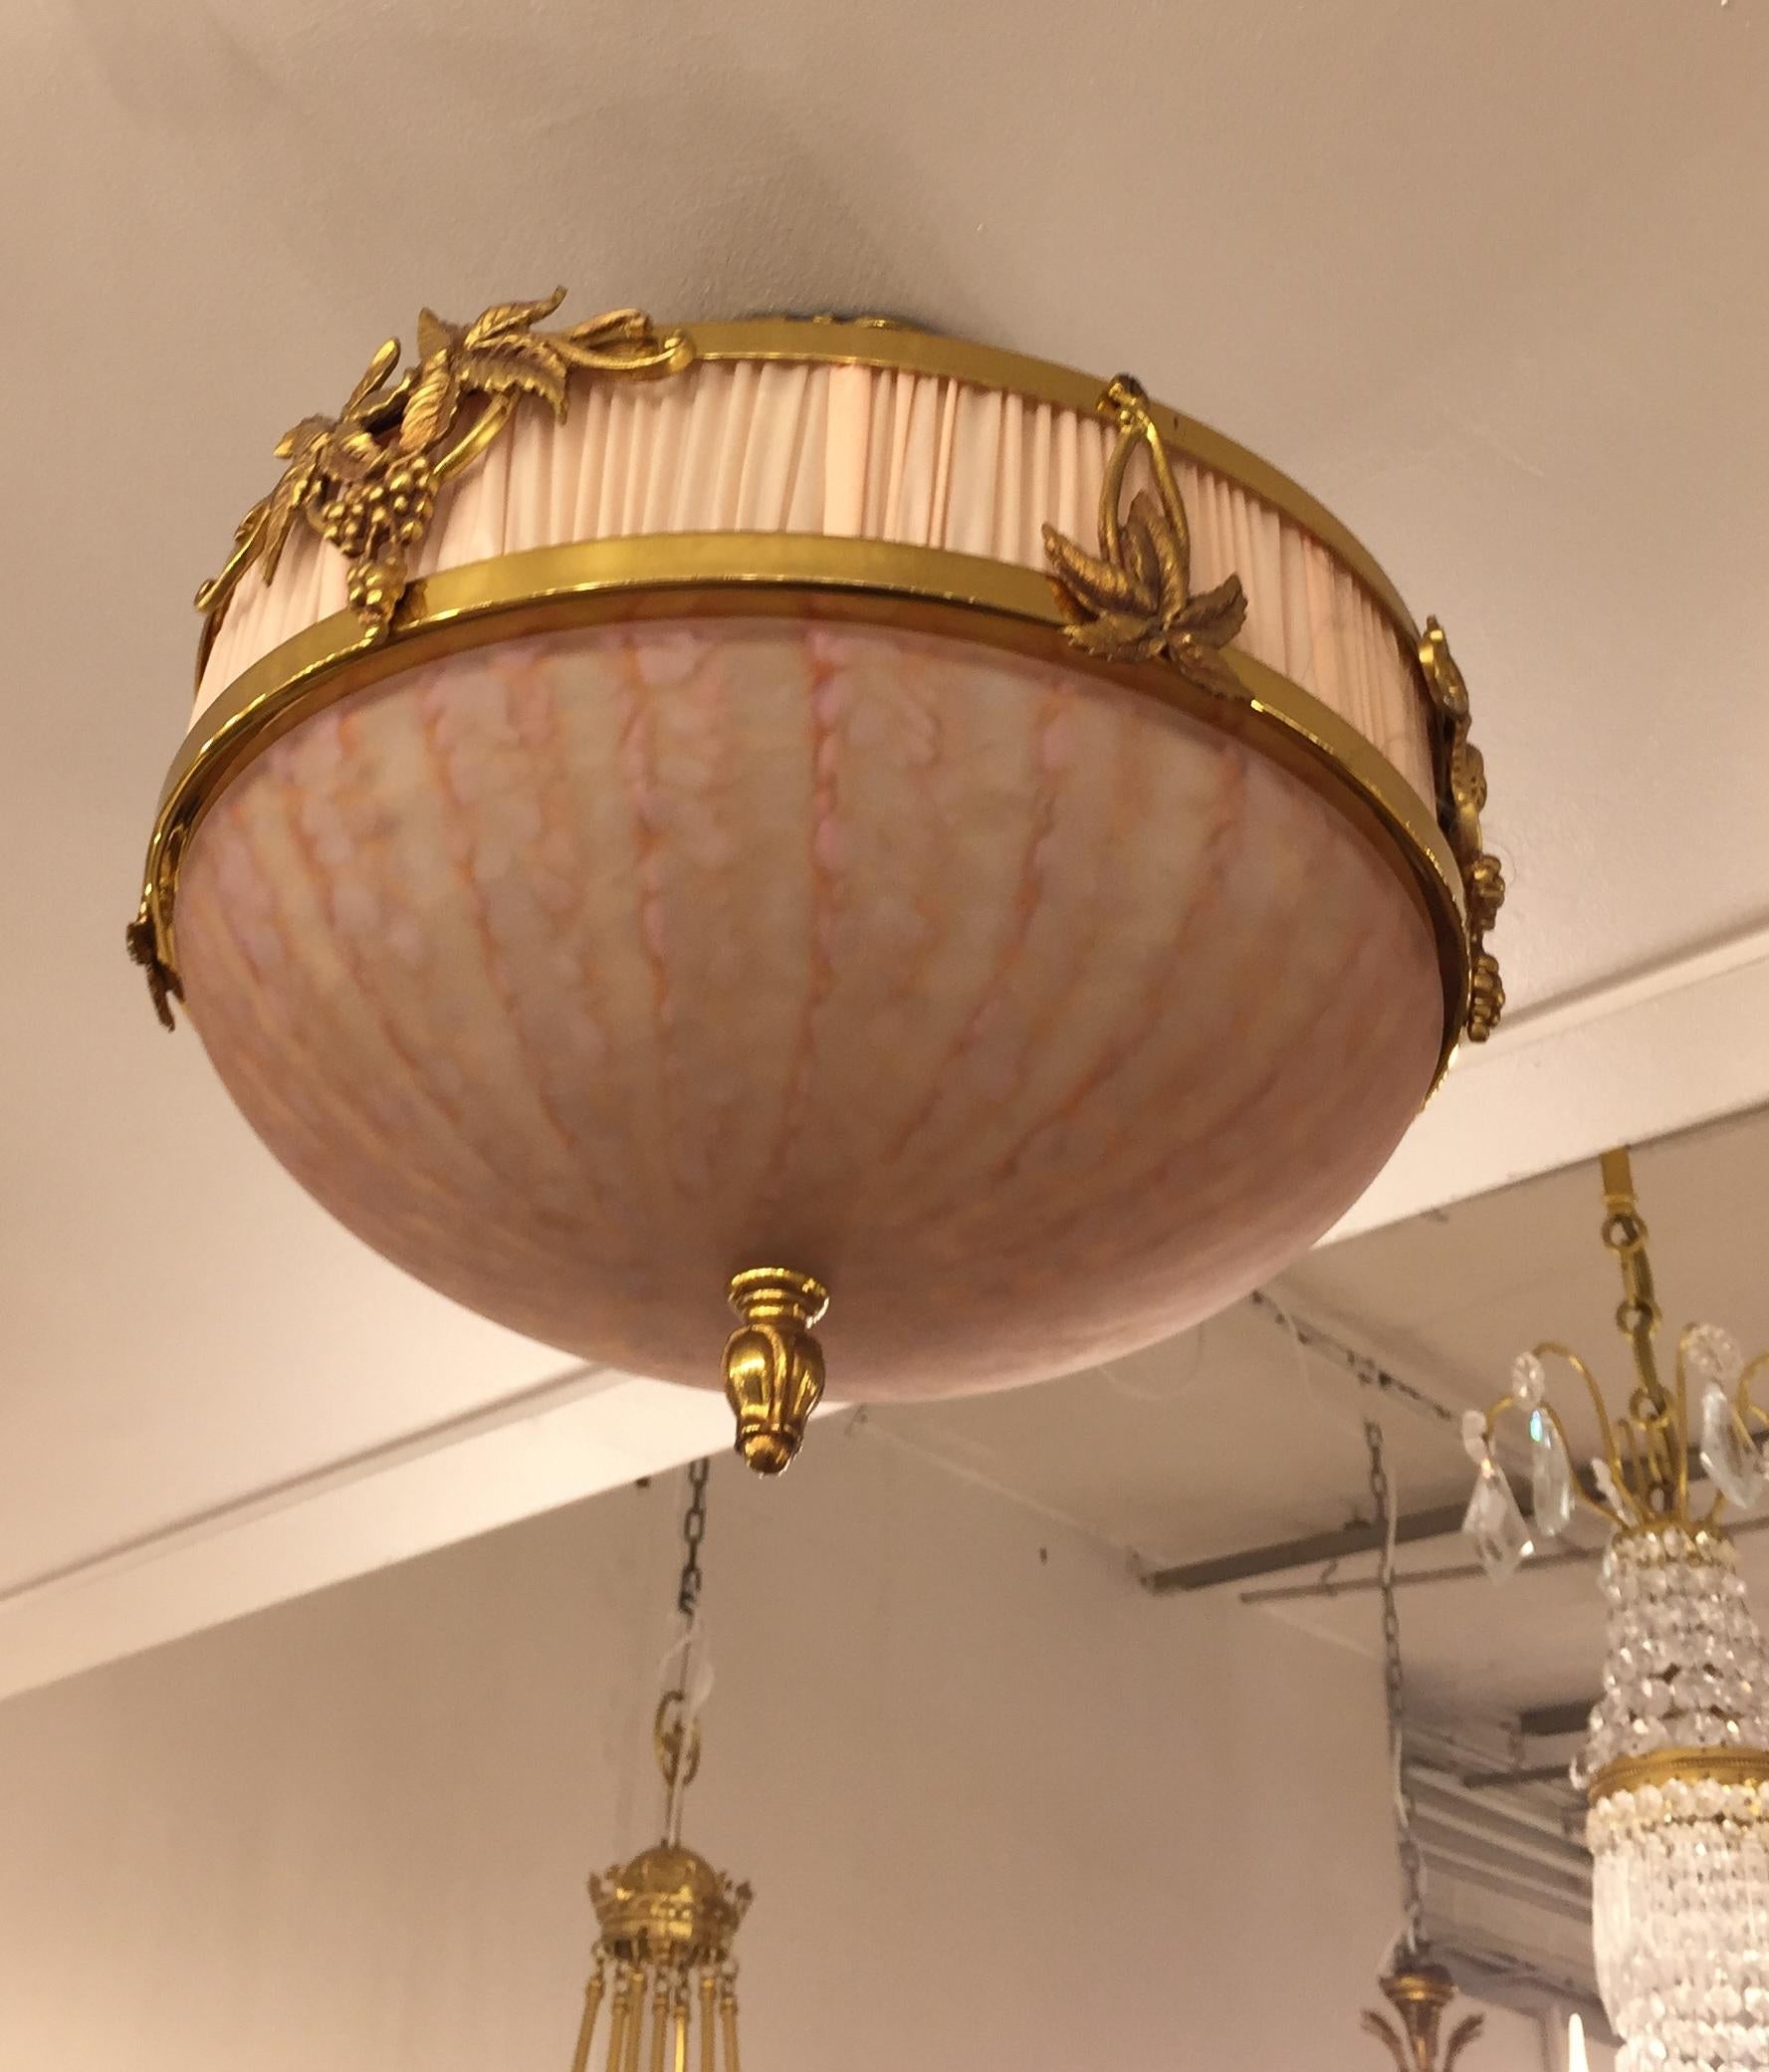 This ceiling light inspired by the romantic current brings a soft and pleasant light.